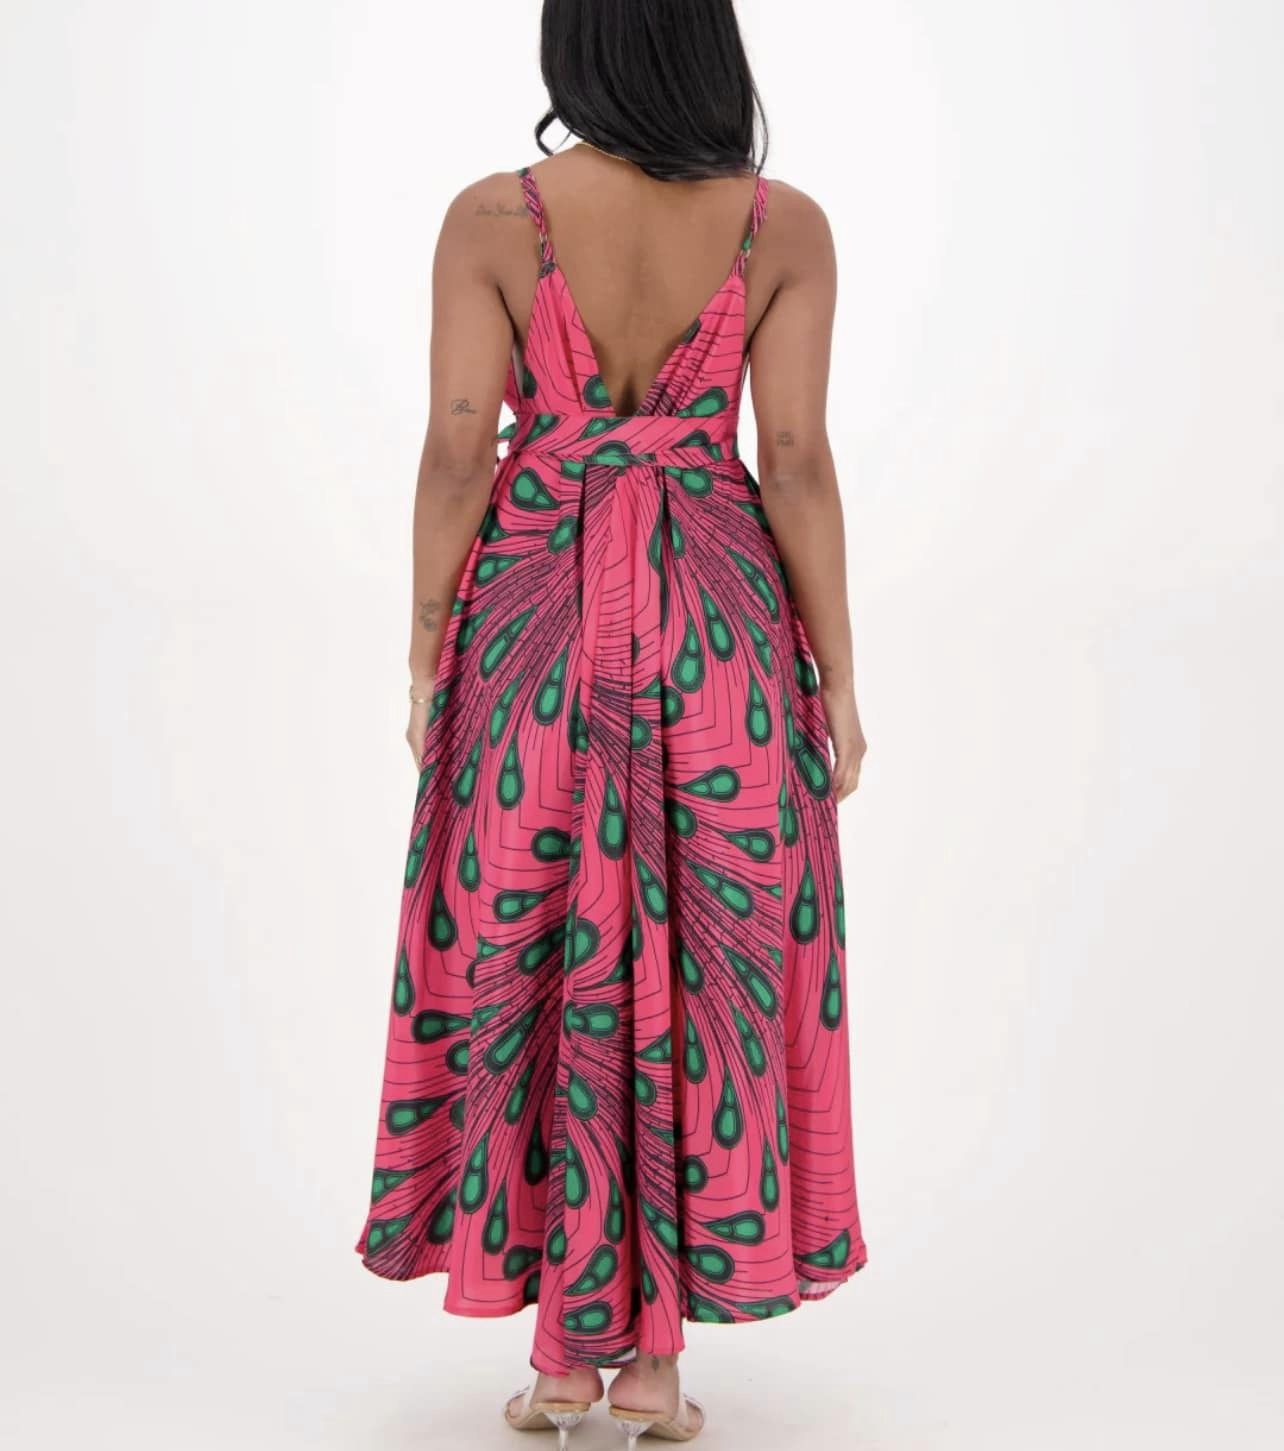 Silk Pink and Green African Inspired Dress Pretty Girl